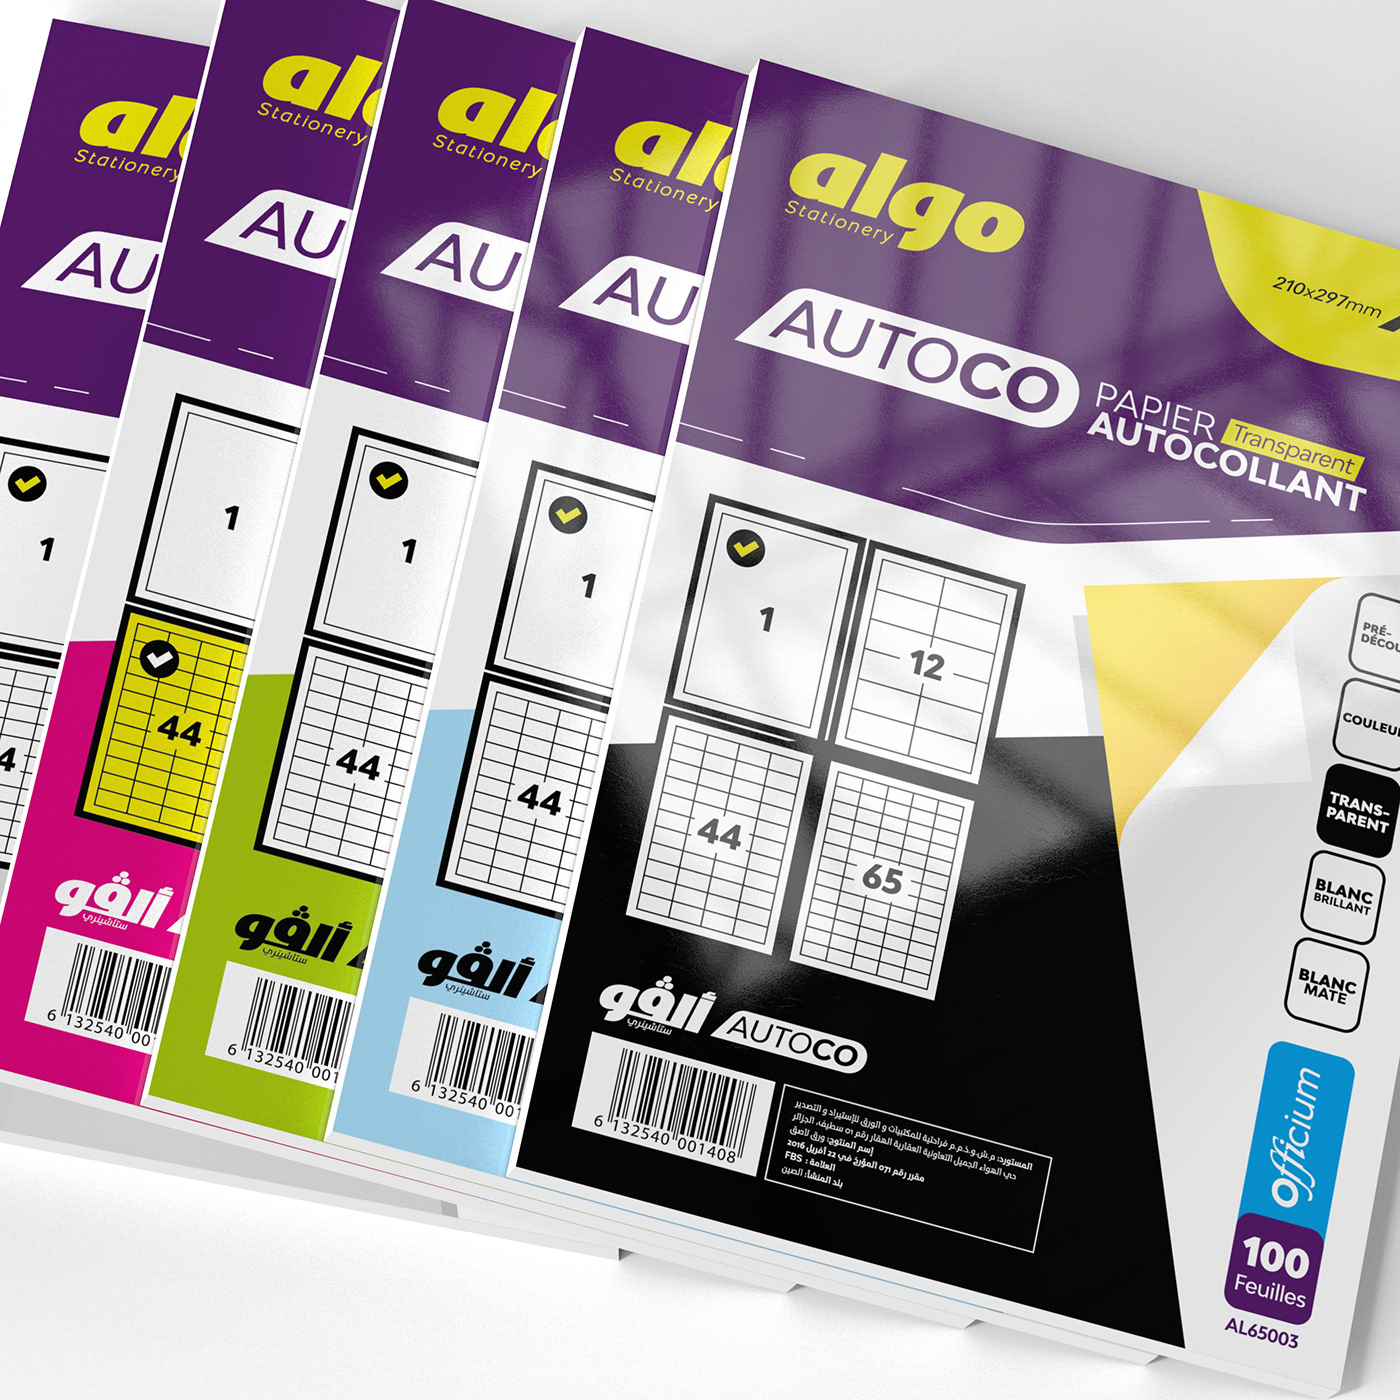 emballage algérie packaging design brand identity Stationery Packaging design emballage algérie maquetta packaging algérie